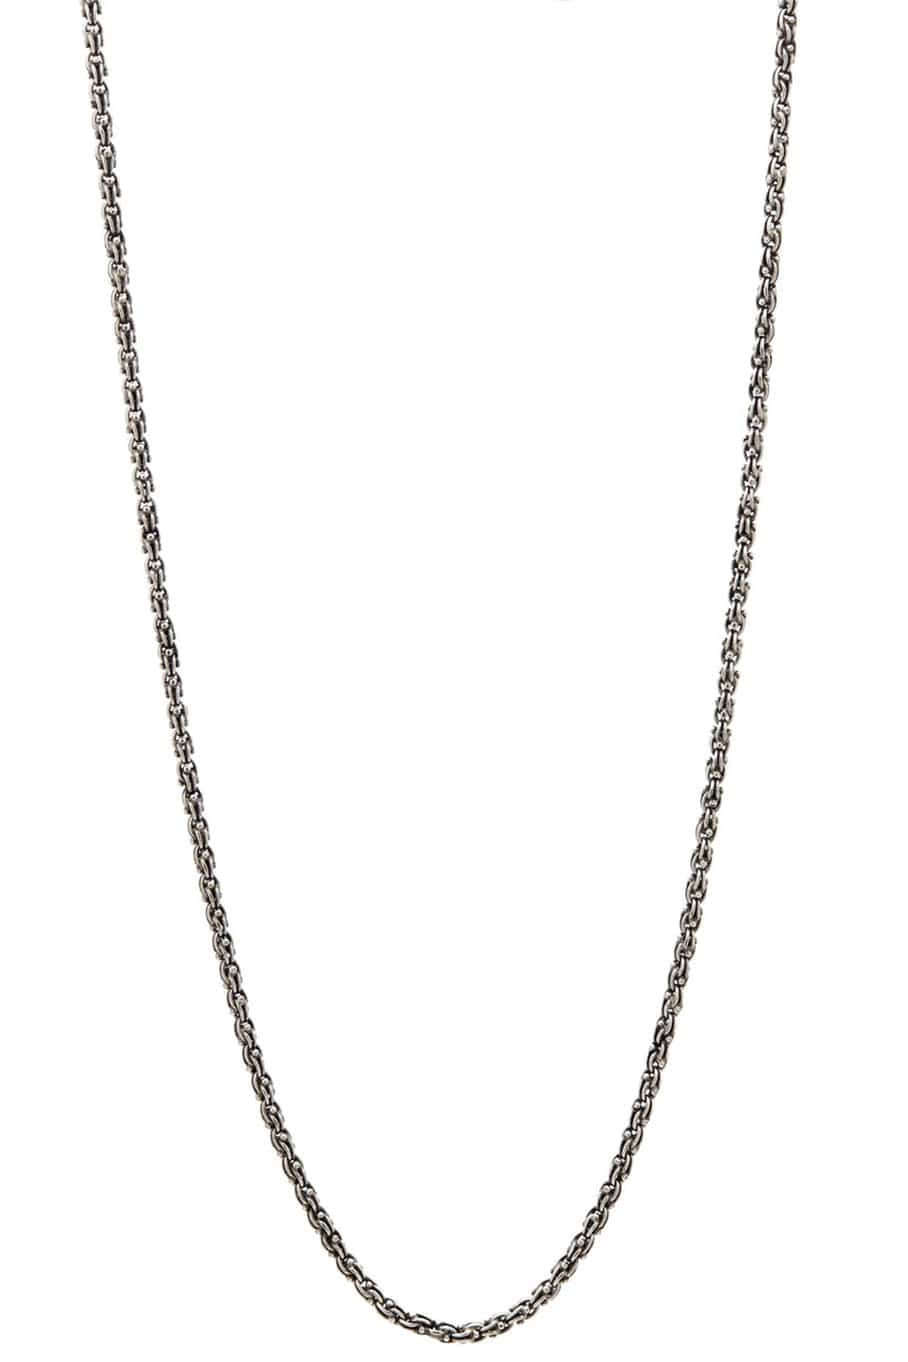 JOHN VARVATOS-Plain Sterling Silver Chain 24IN-SS